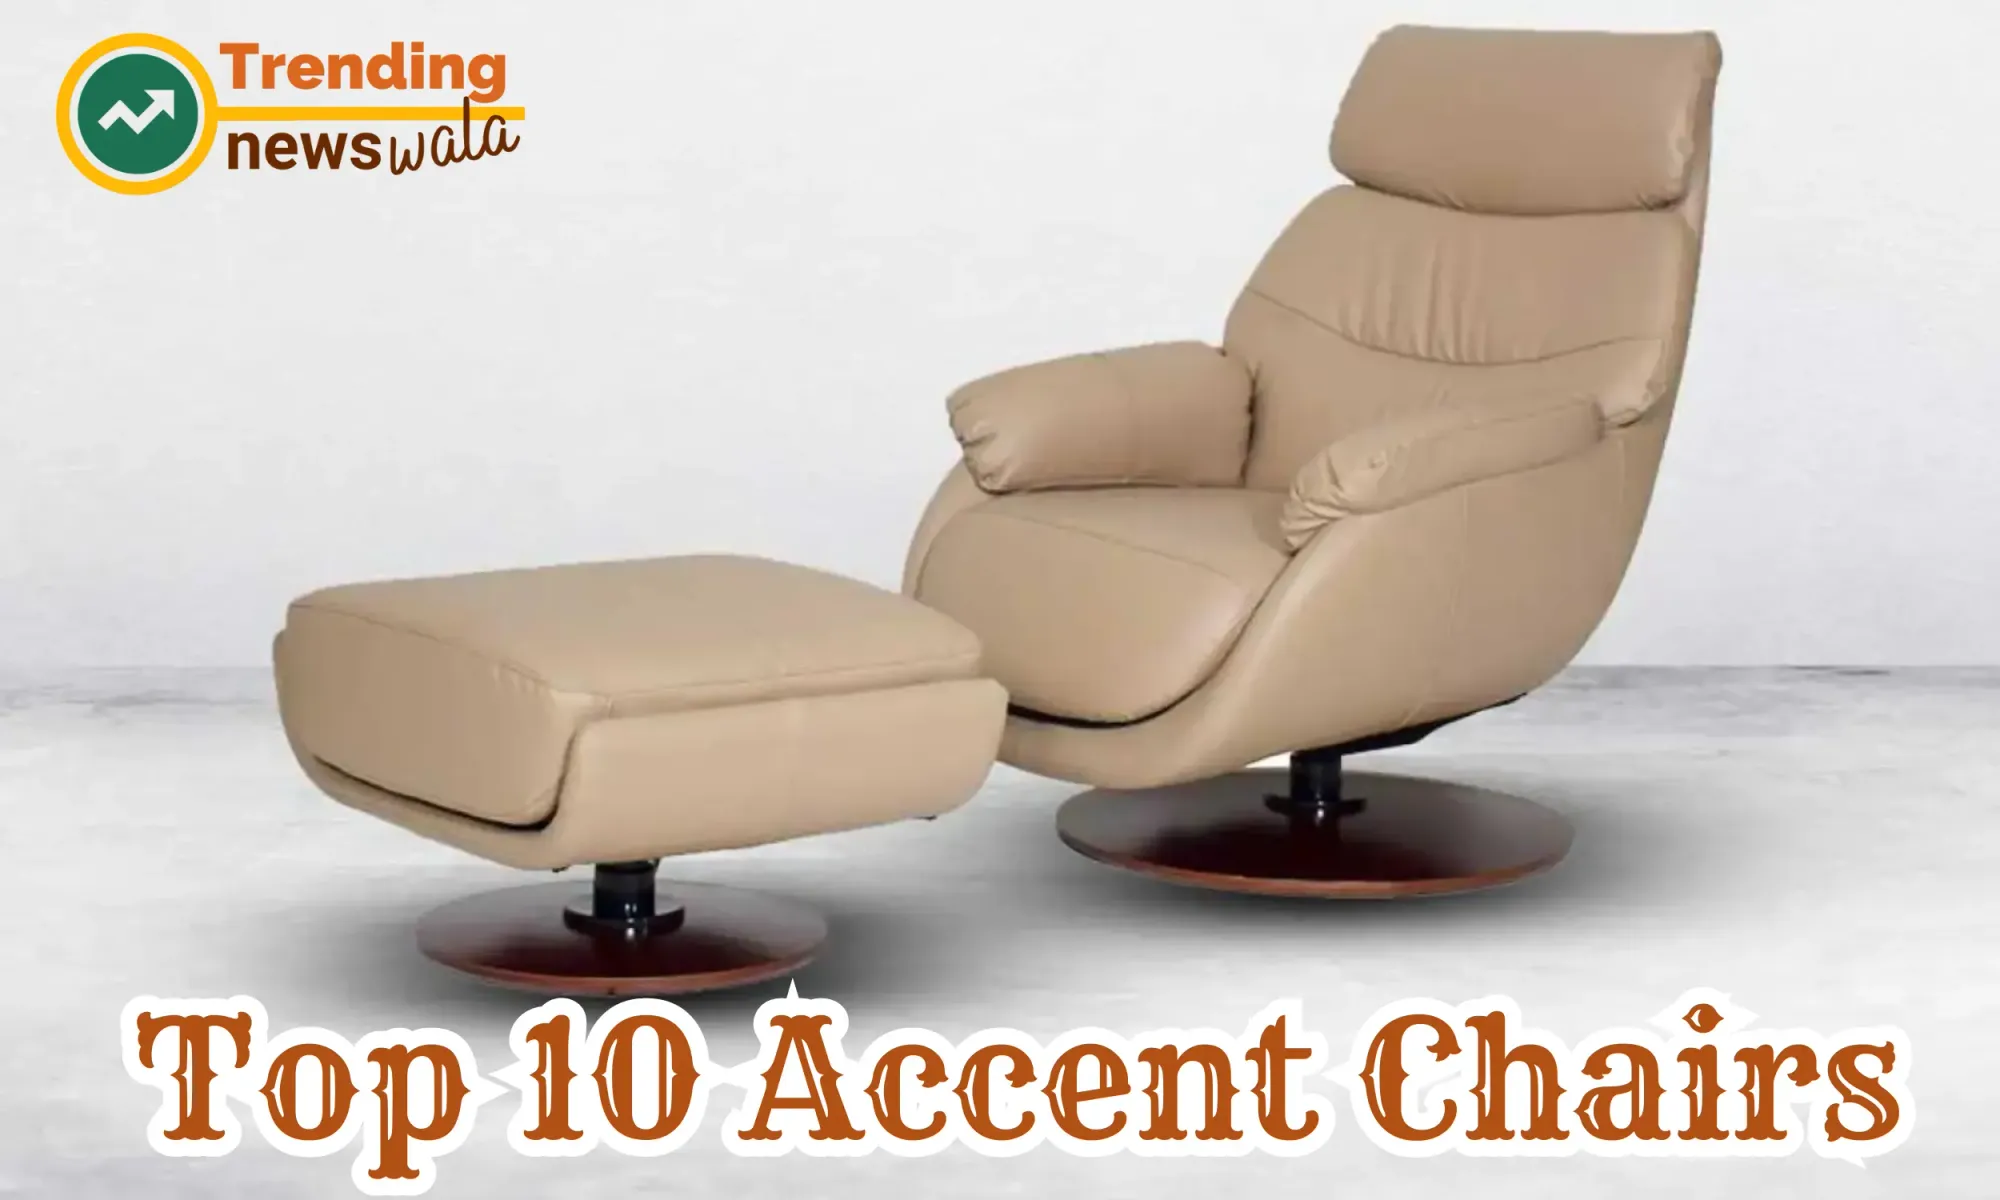 Top 10 Accent Chairs